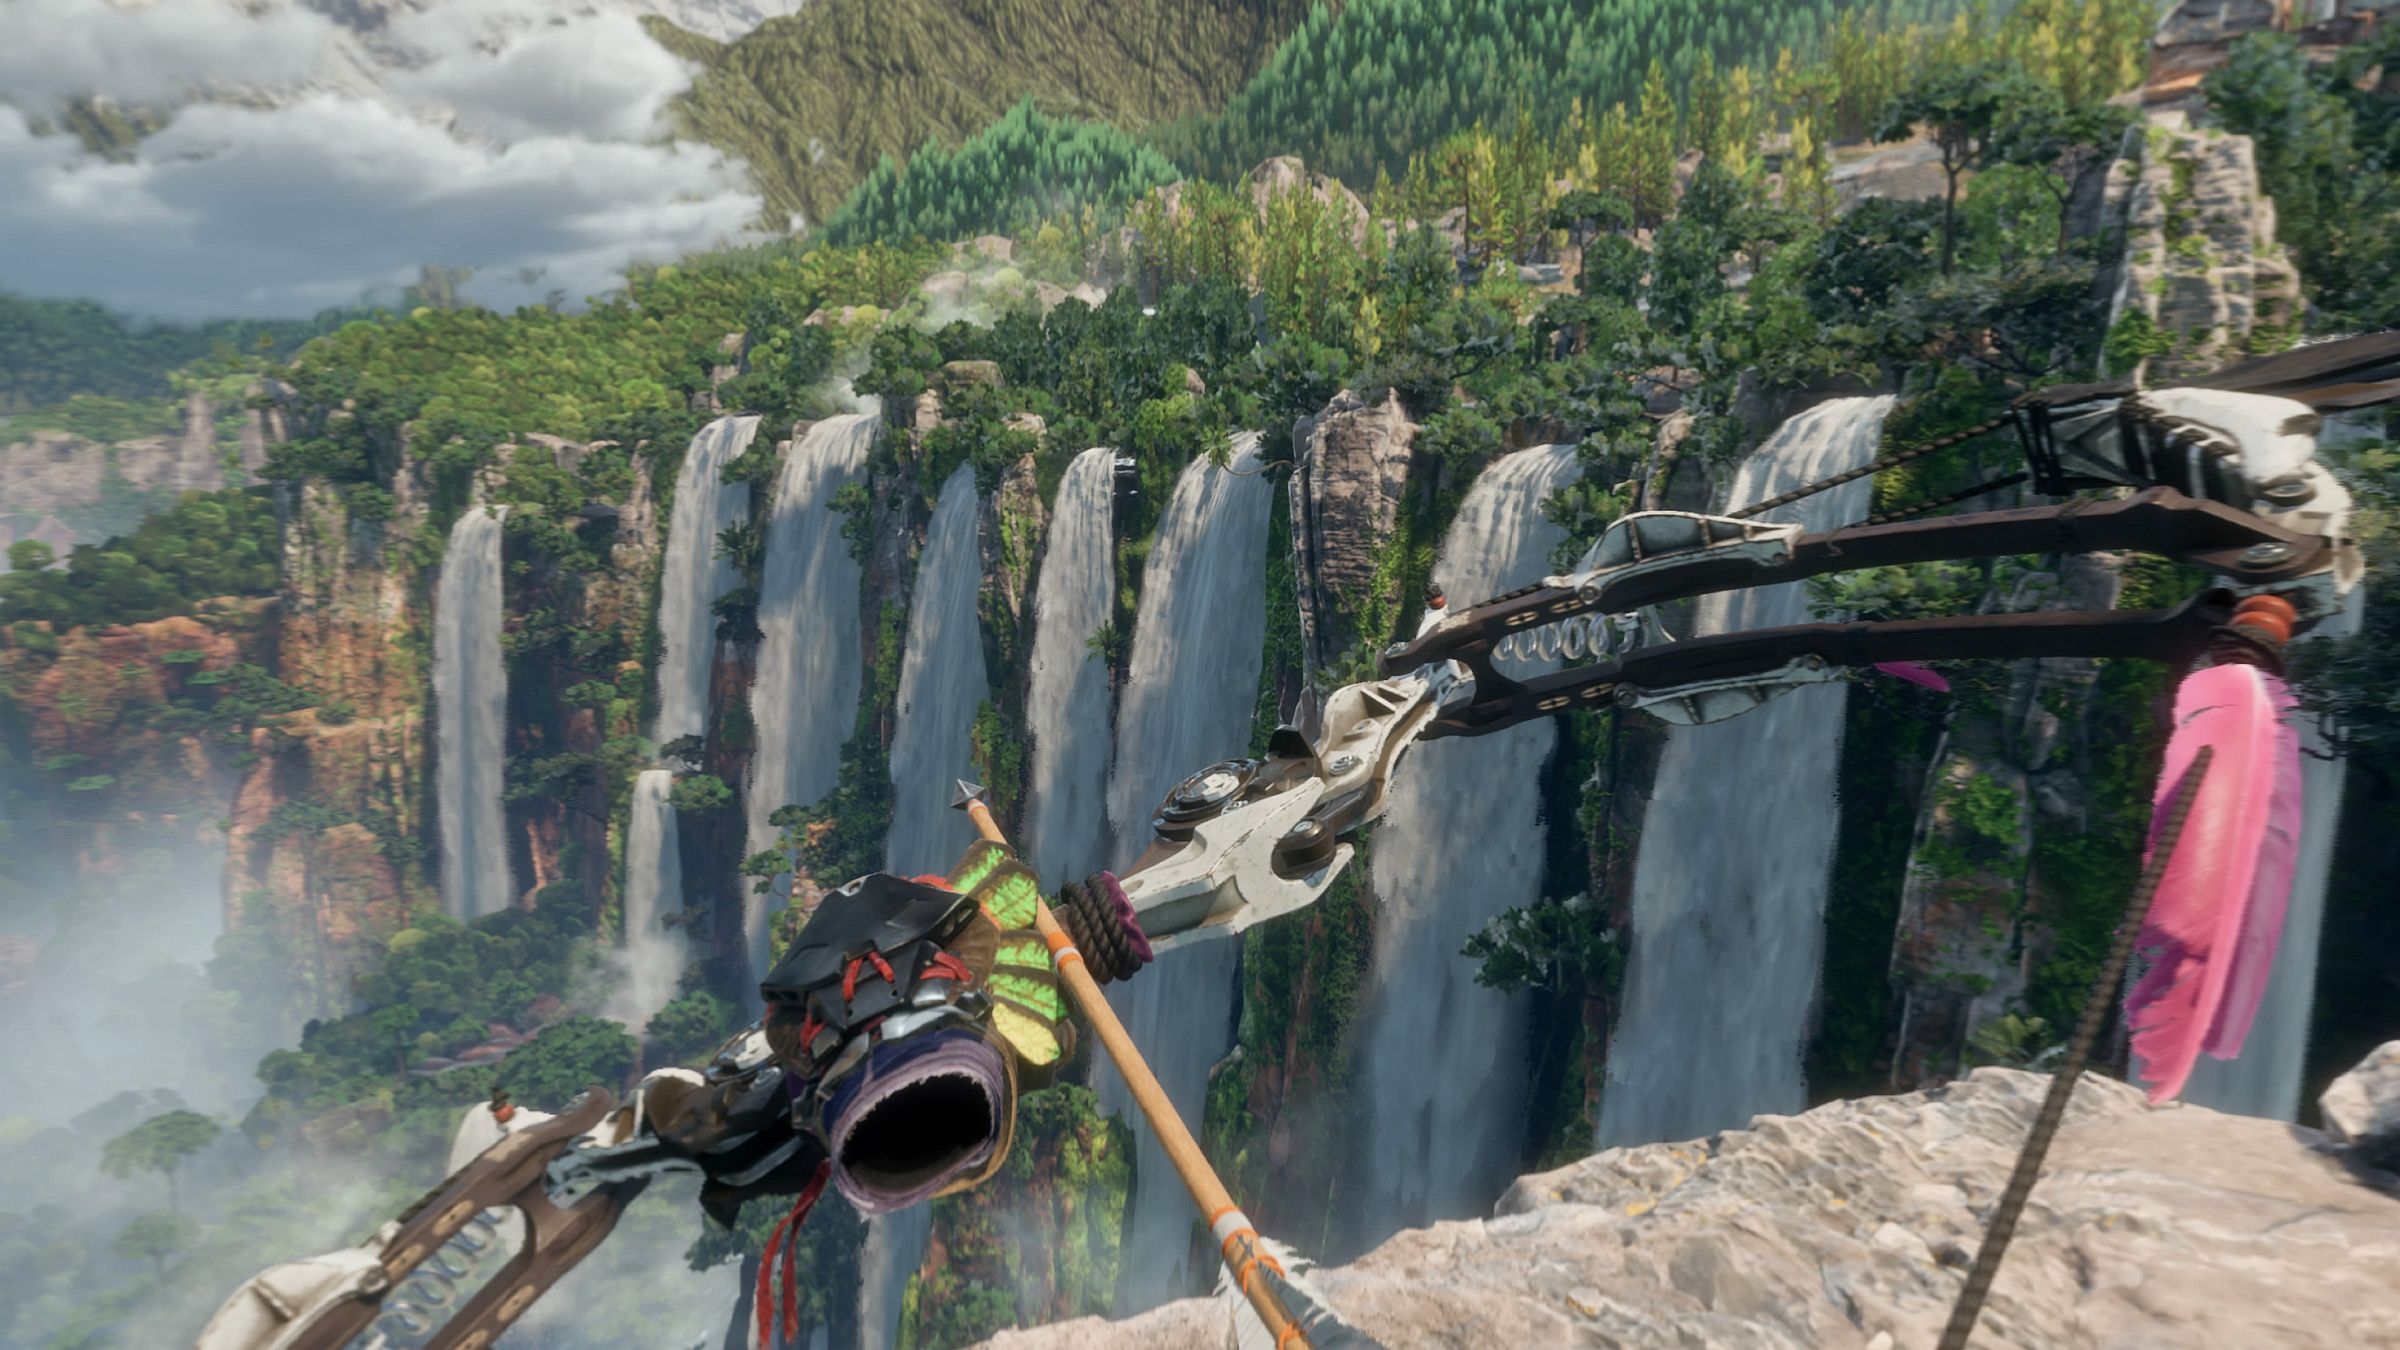 An ornate bow aloft, arrow nocked, standing atop a cliff overlooking an impressive array of nine waterfalls on the opposite cliff.